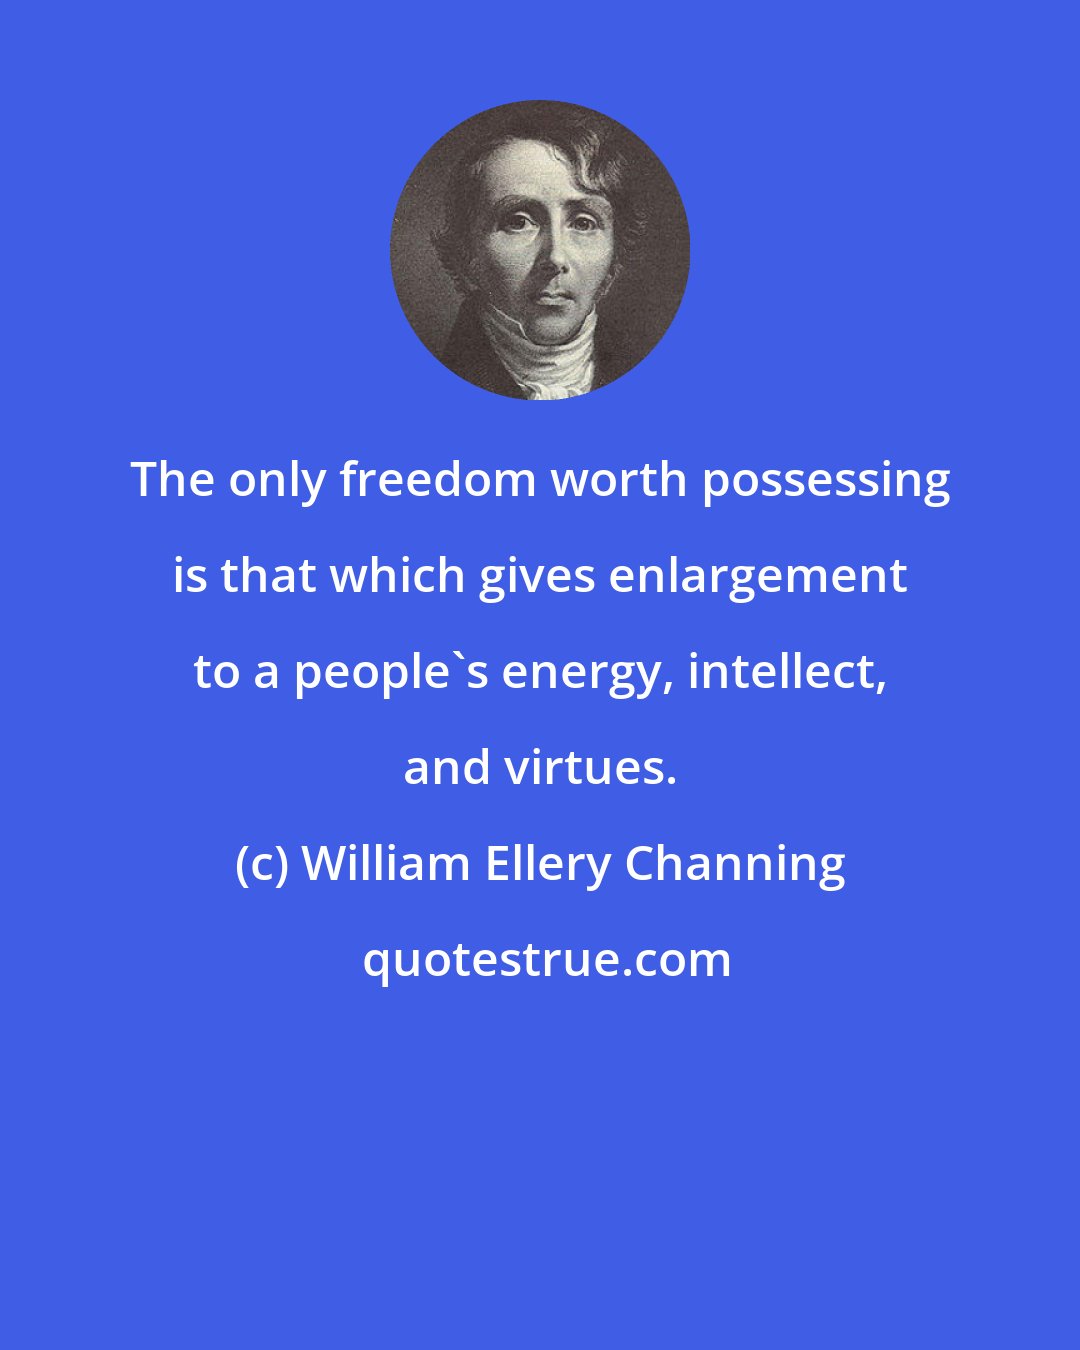 William Ellery Channing: The only freedom worth possessing is that which gives enlargement to a people's energy, intellect, and virtues.